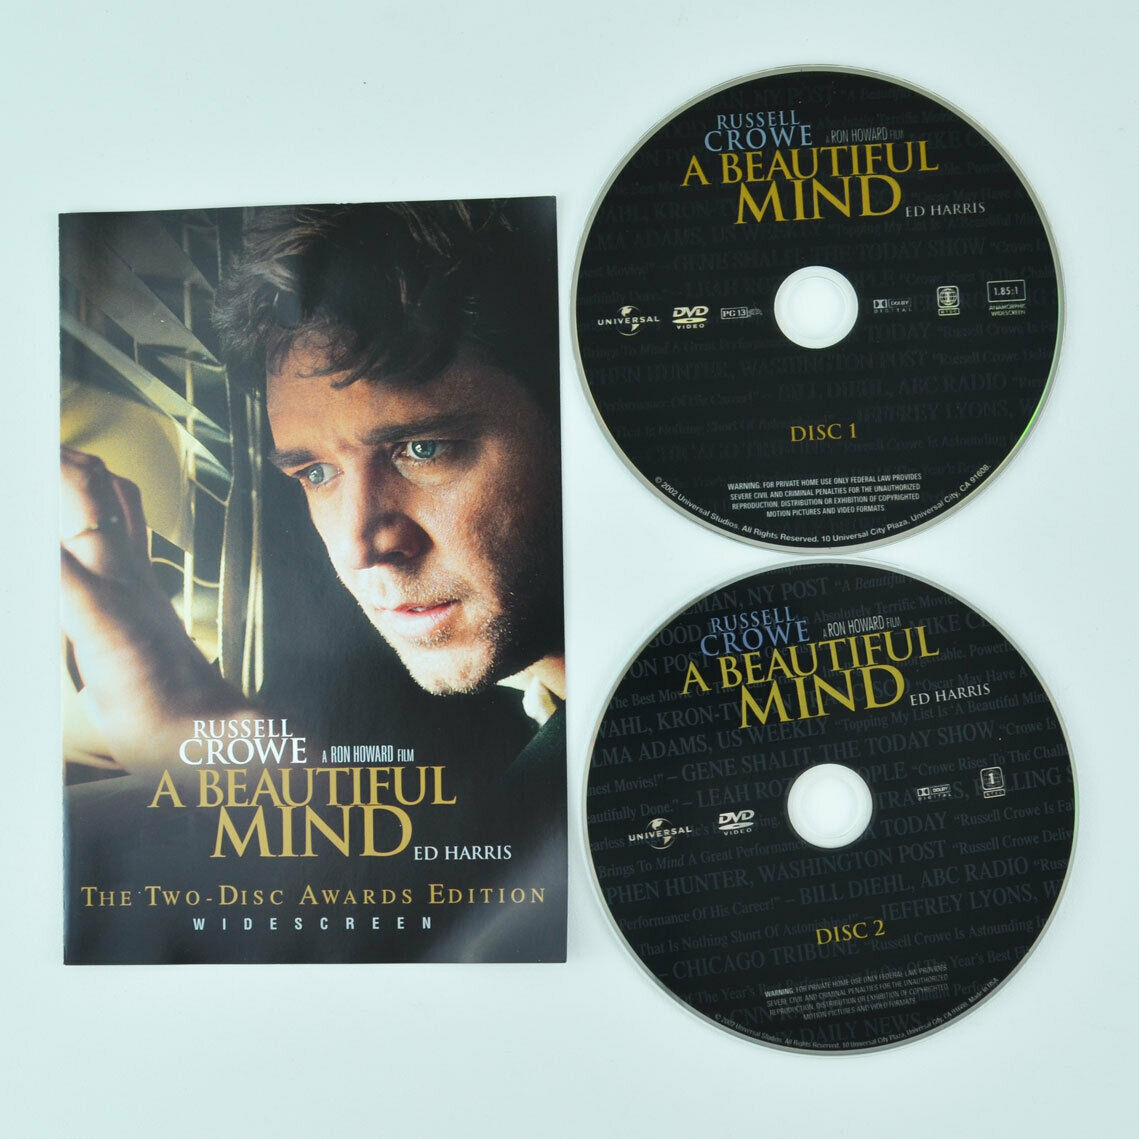 A Beautiful Mind (DVD, 2002, 2-Disc Set, Widescreen) Russell Crowe - DISCS ONLY